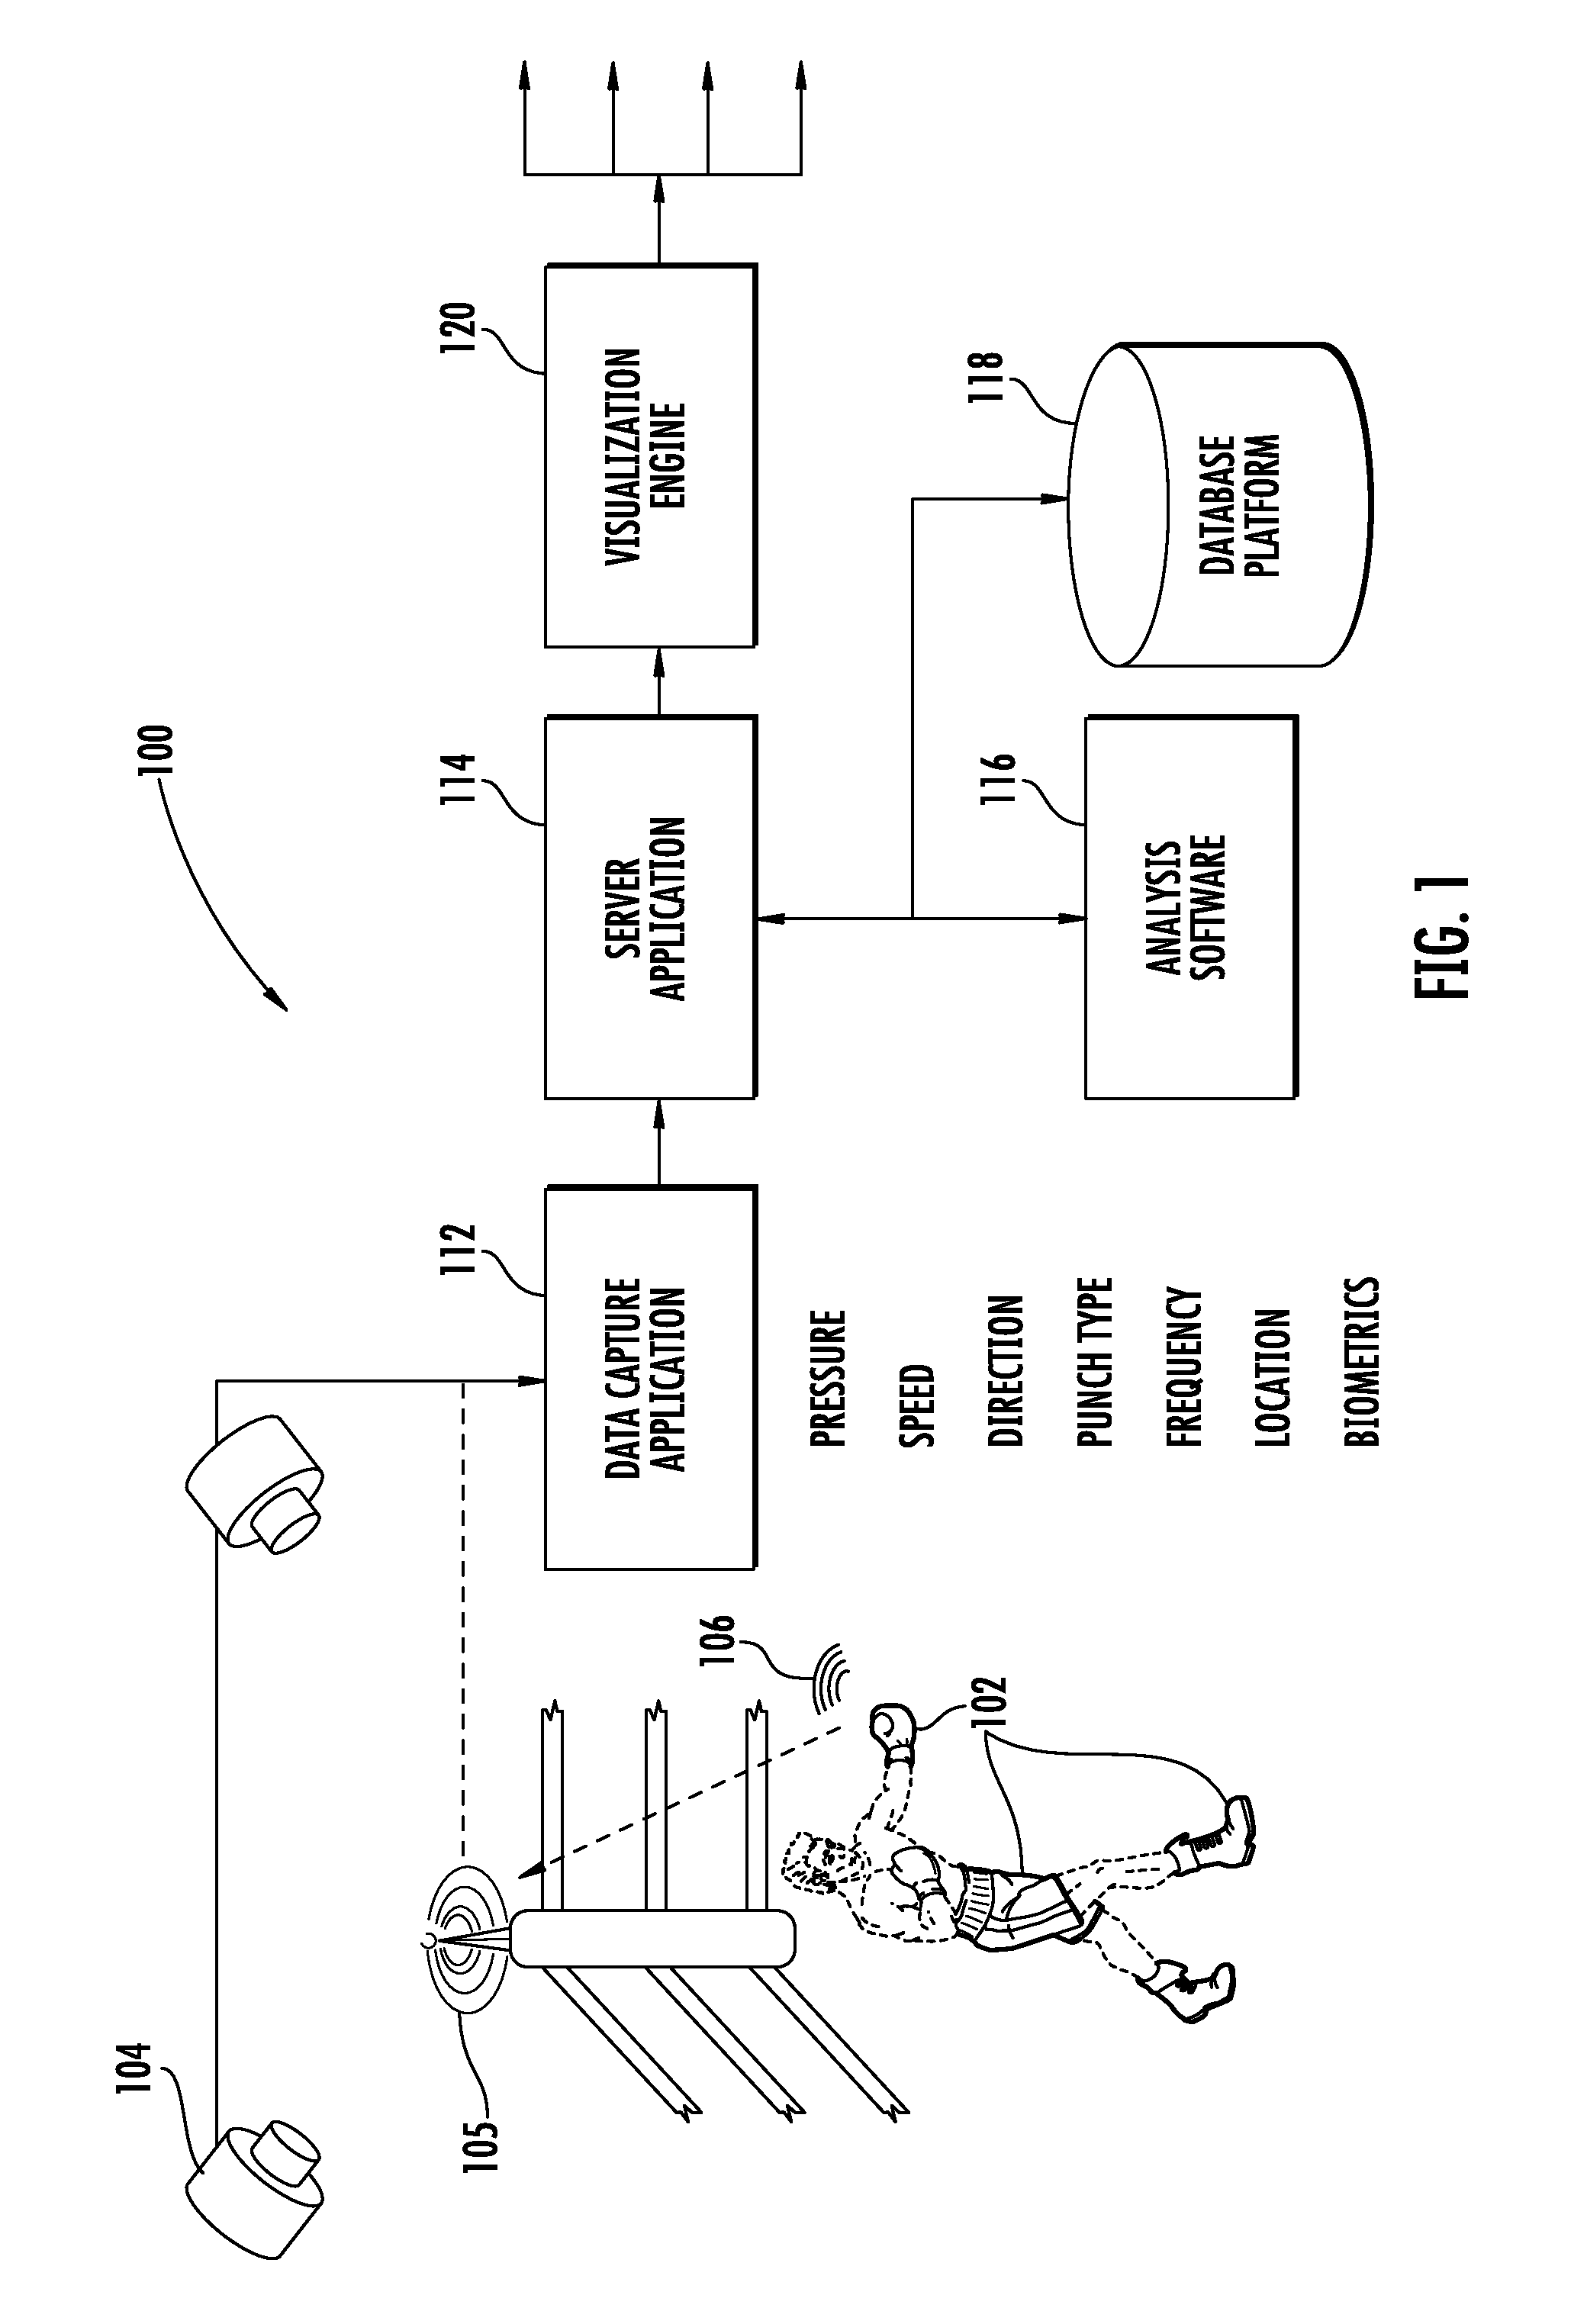 System and method for gathering and analyzing objective motion data